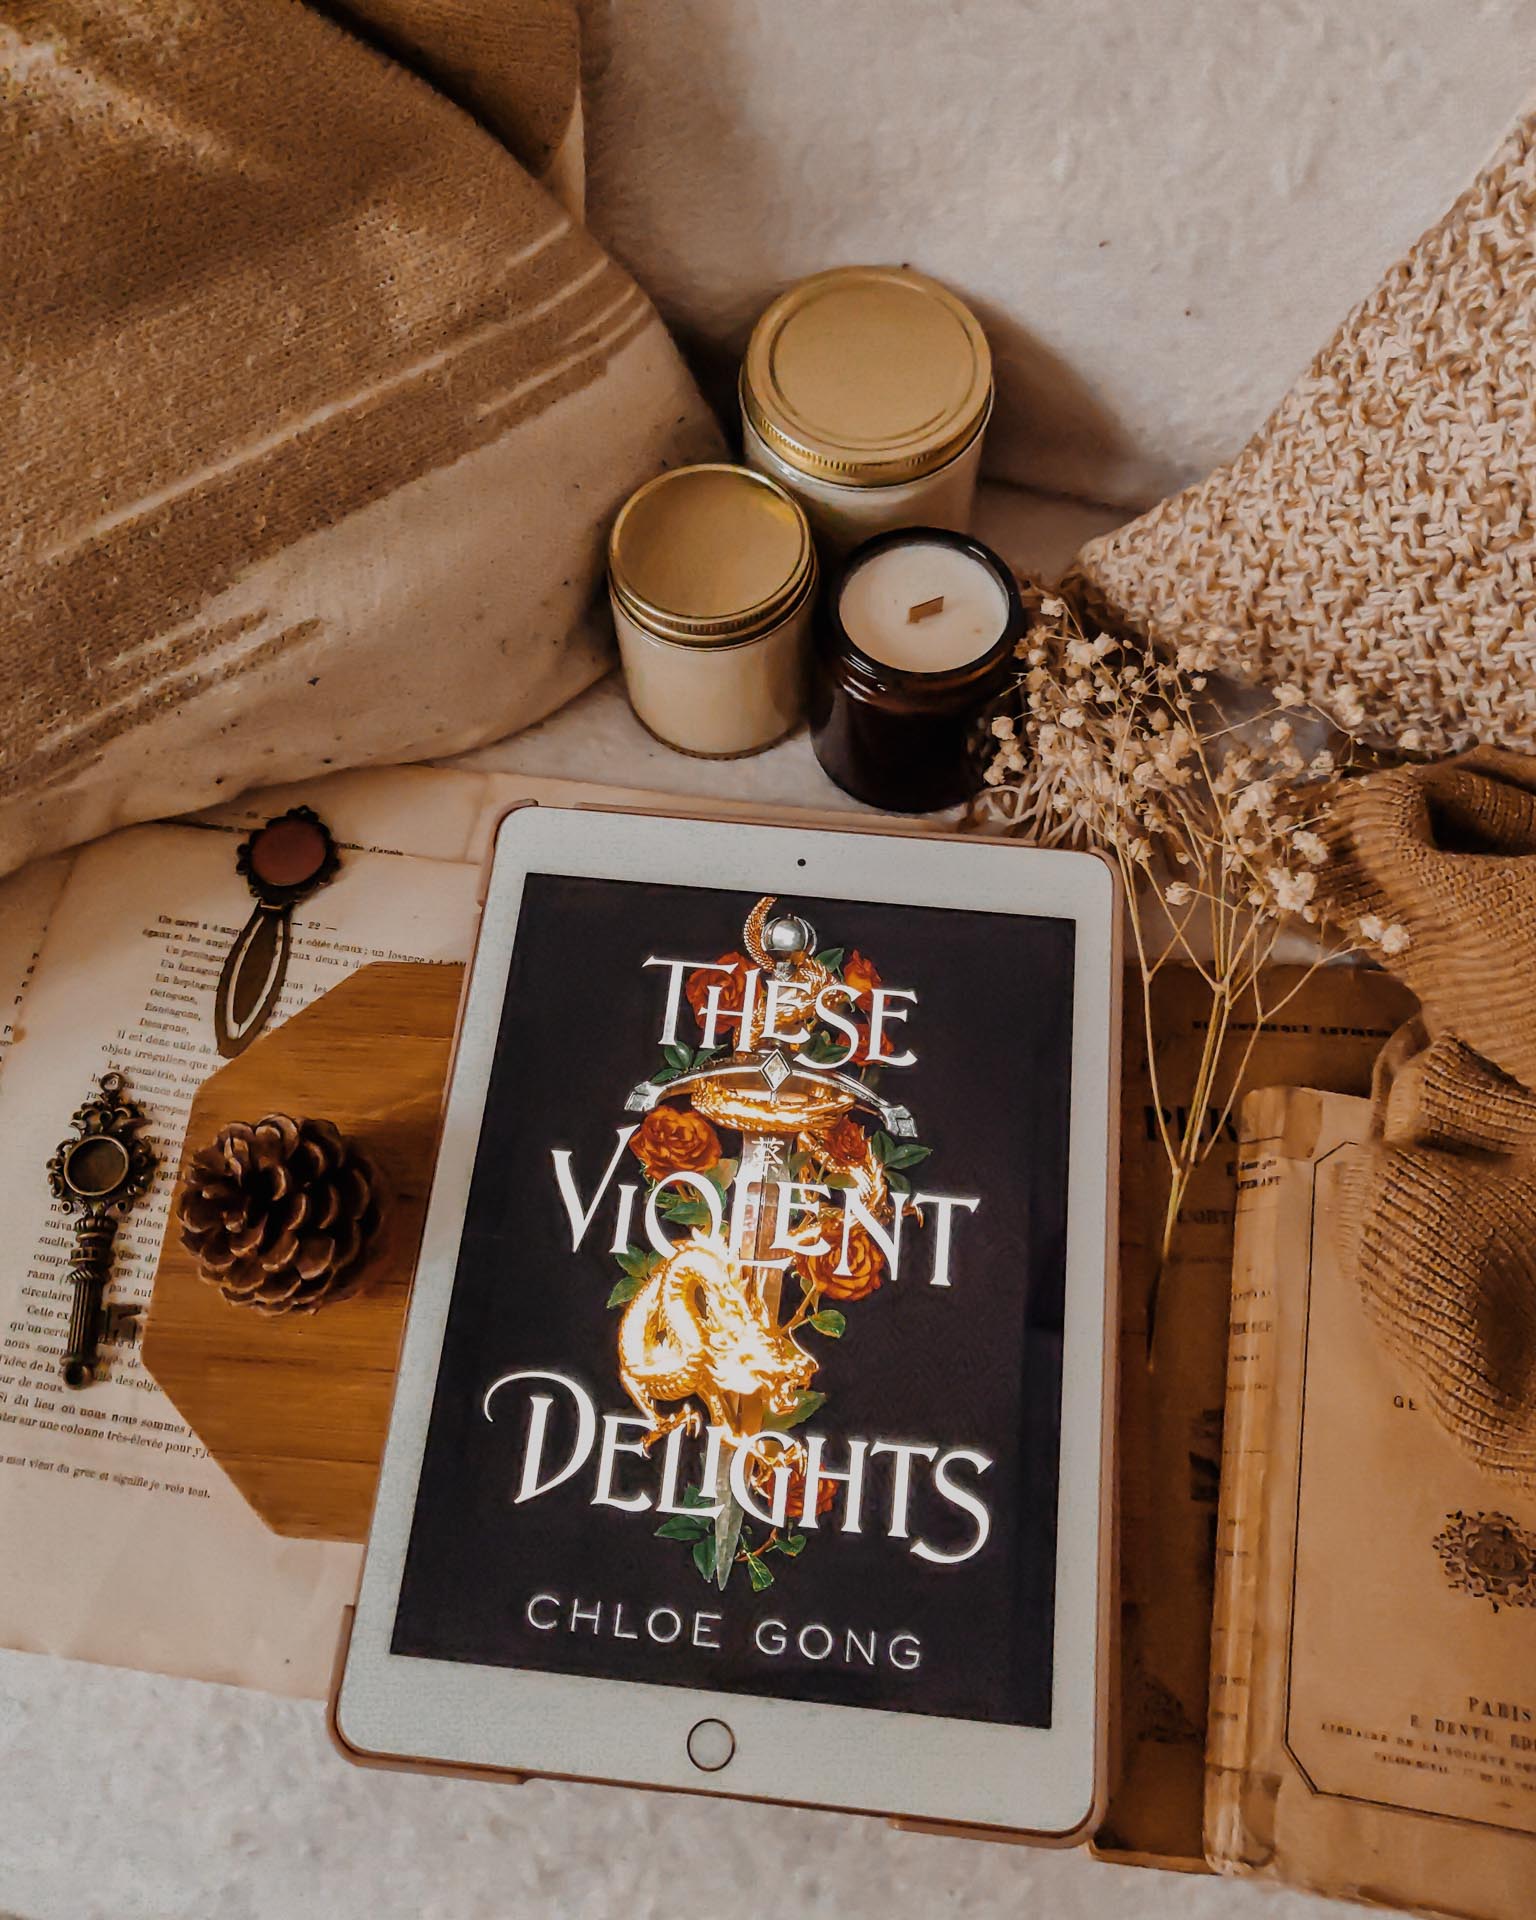 These Violent Delights photo